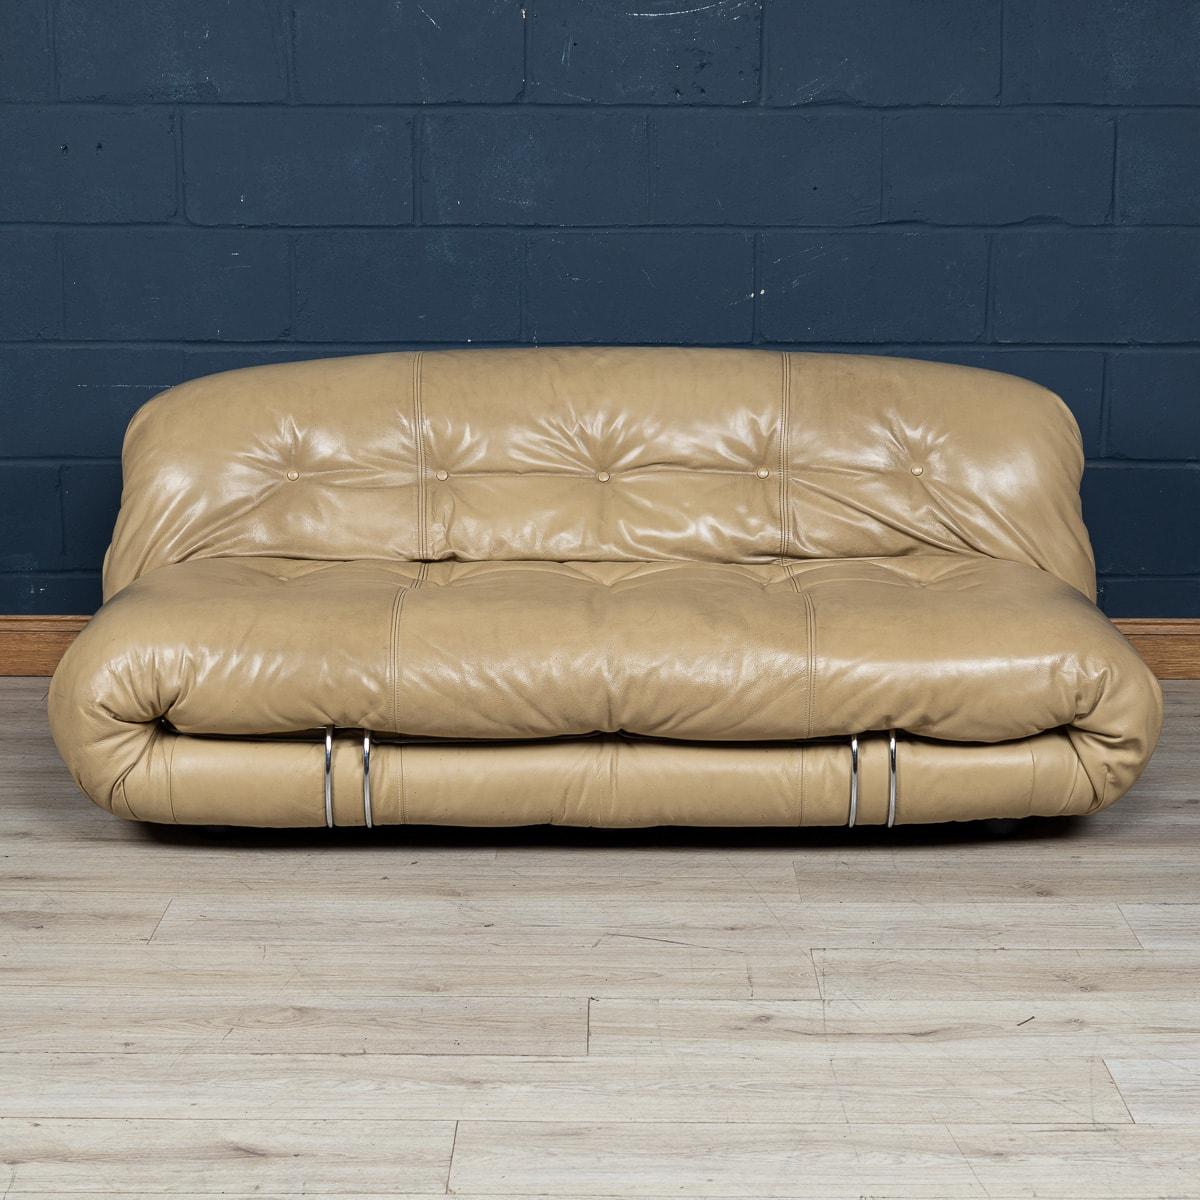 A beautiful “Soriana“ leather sofa by Tobia Scarpa for Cassina, made in Italy around the latter part of the 20th century. Finished in a very rare cognac colour leather, it is lovely way to bring colour and elegance to any interior setting, working